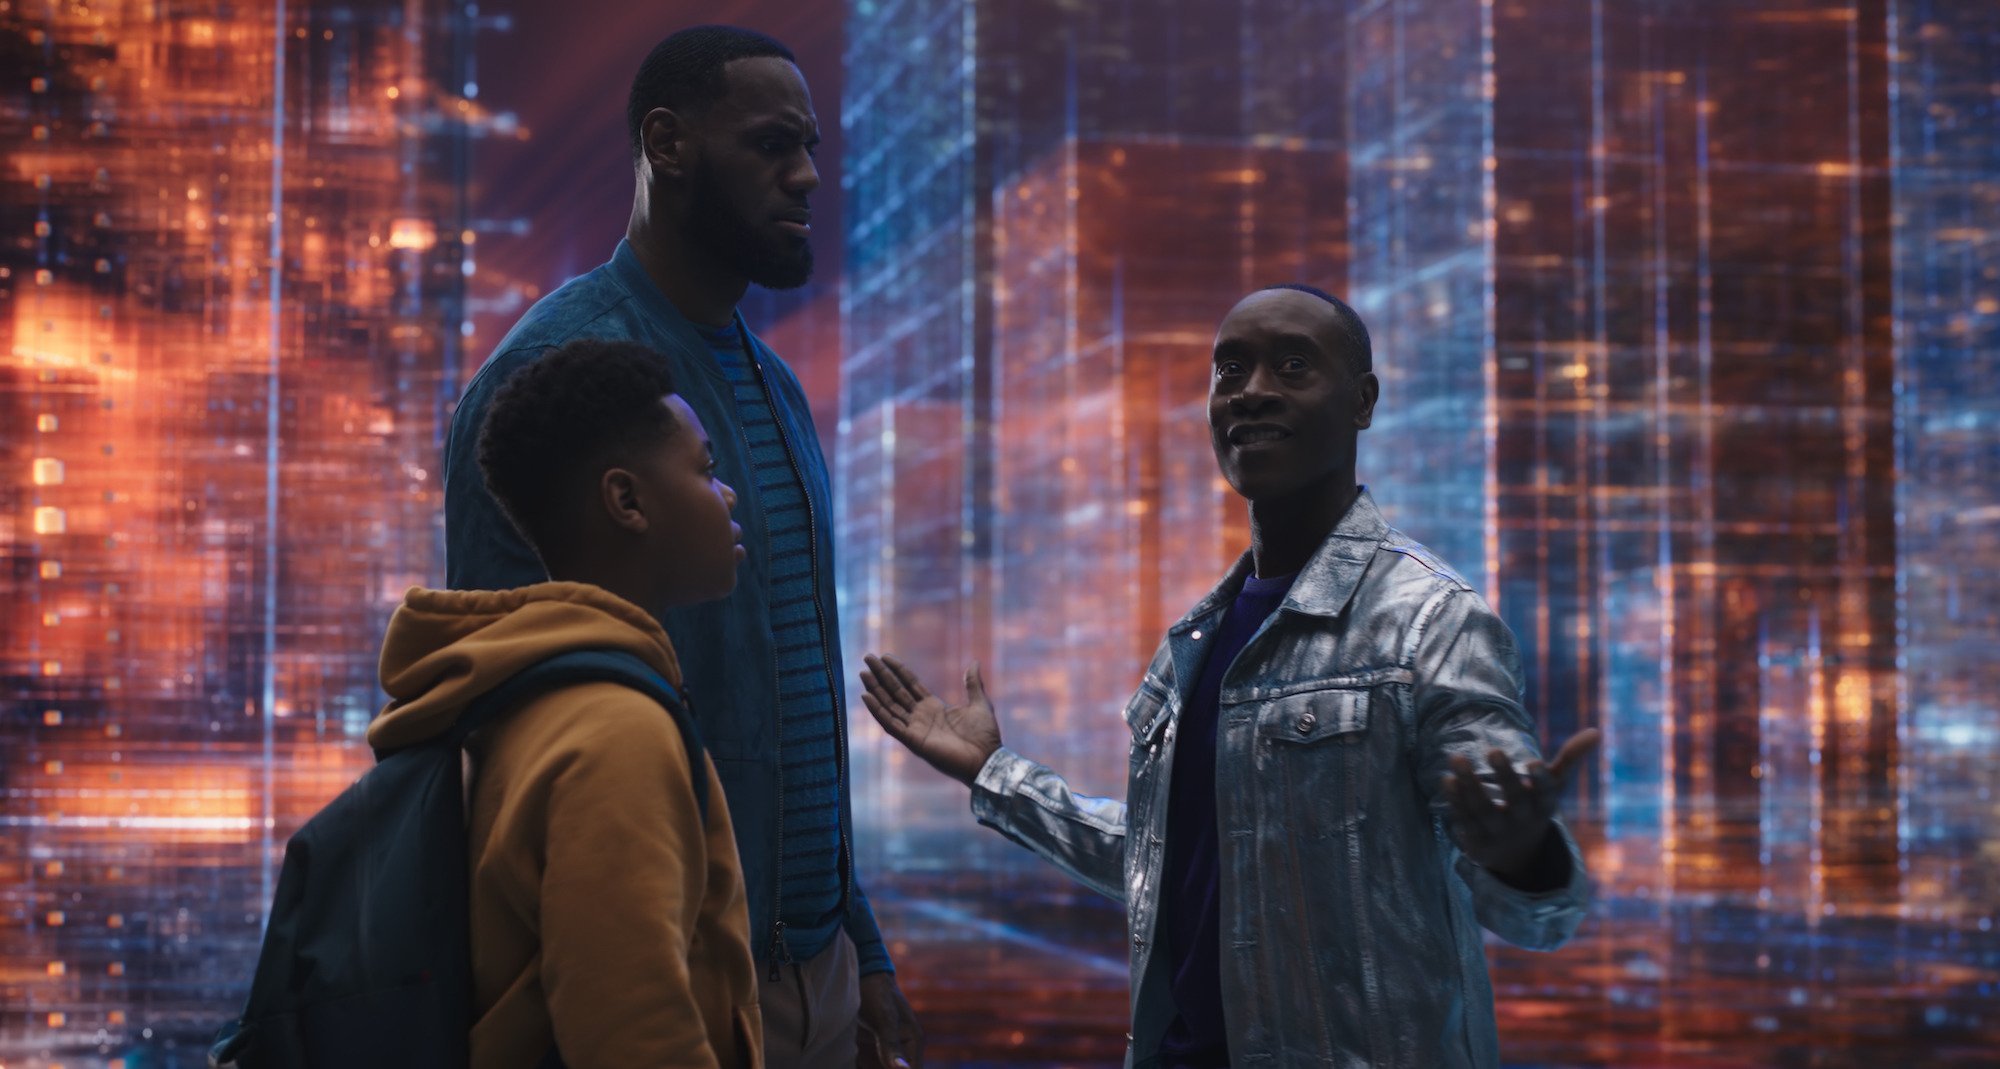 LeBron James and Don Cheadle meet in the computer in Space Jam 2